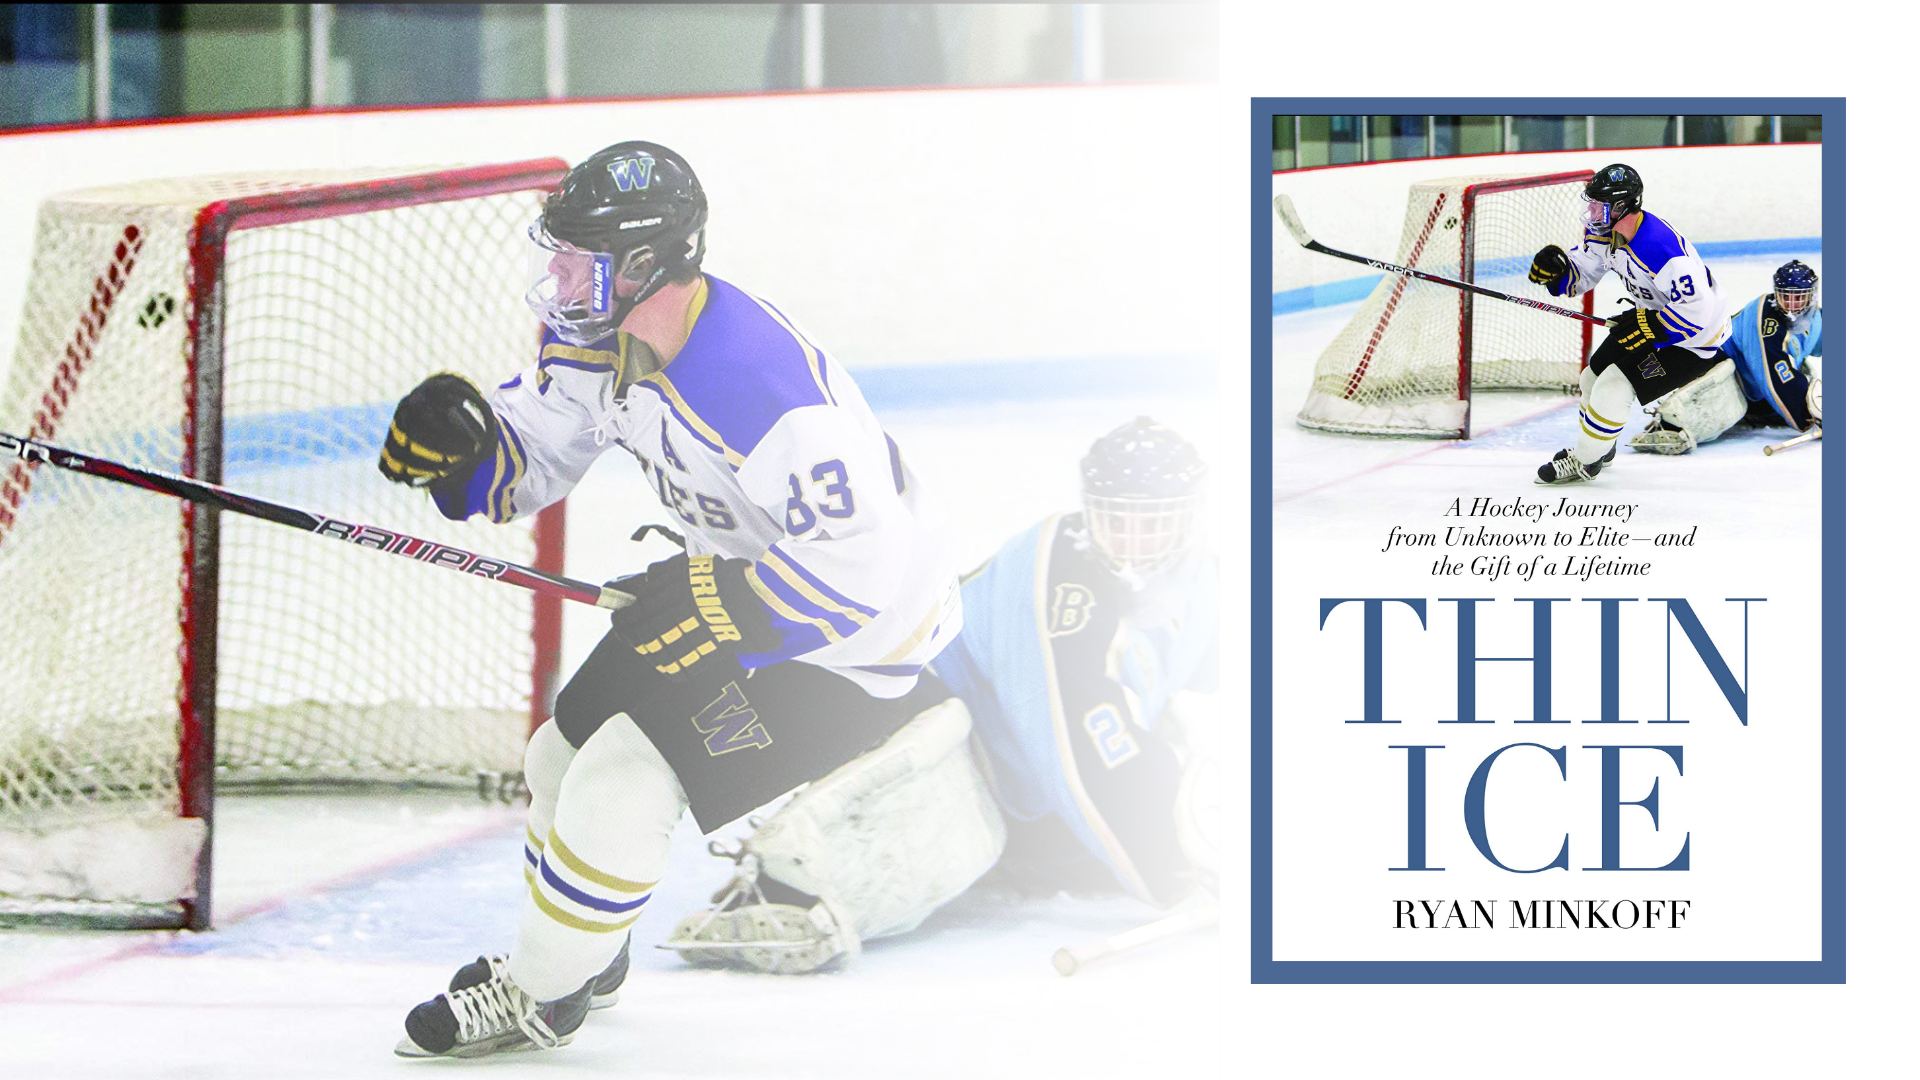 UW's all-time leading hockey scorer, Ryan Minkoff, shares his journey from youth hockey to making it big in Finland in autobiography, "Thin Ice".